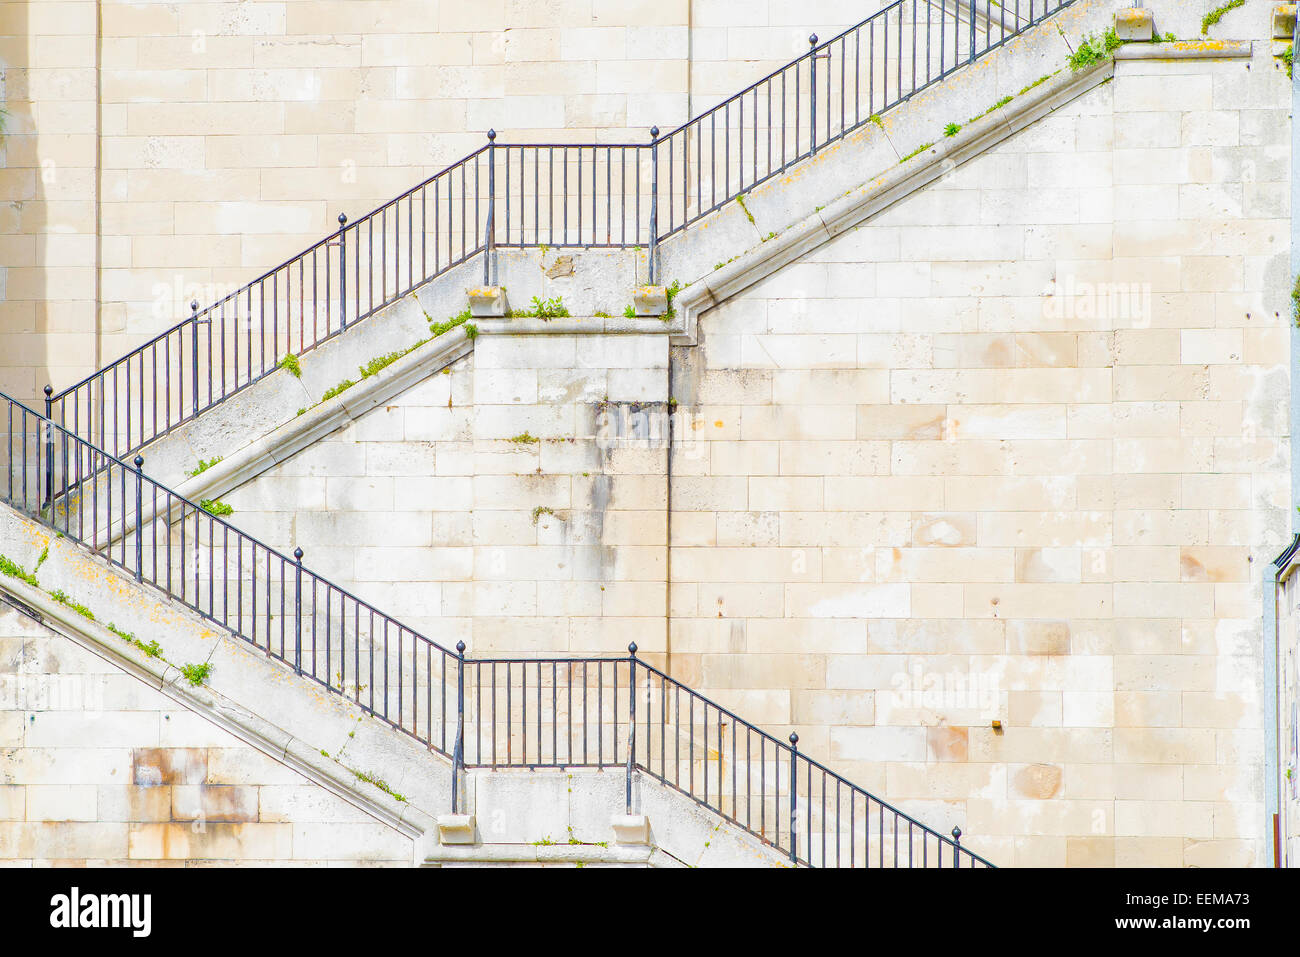 Banister and staircase on tall building Stock Photo